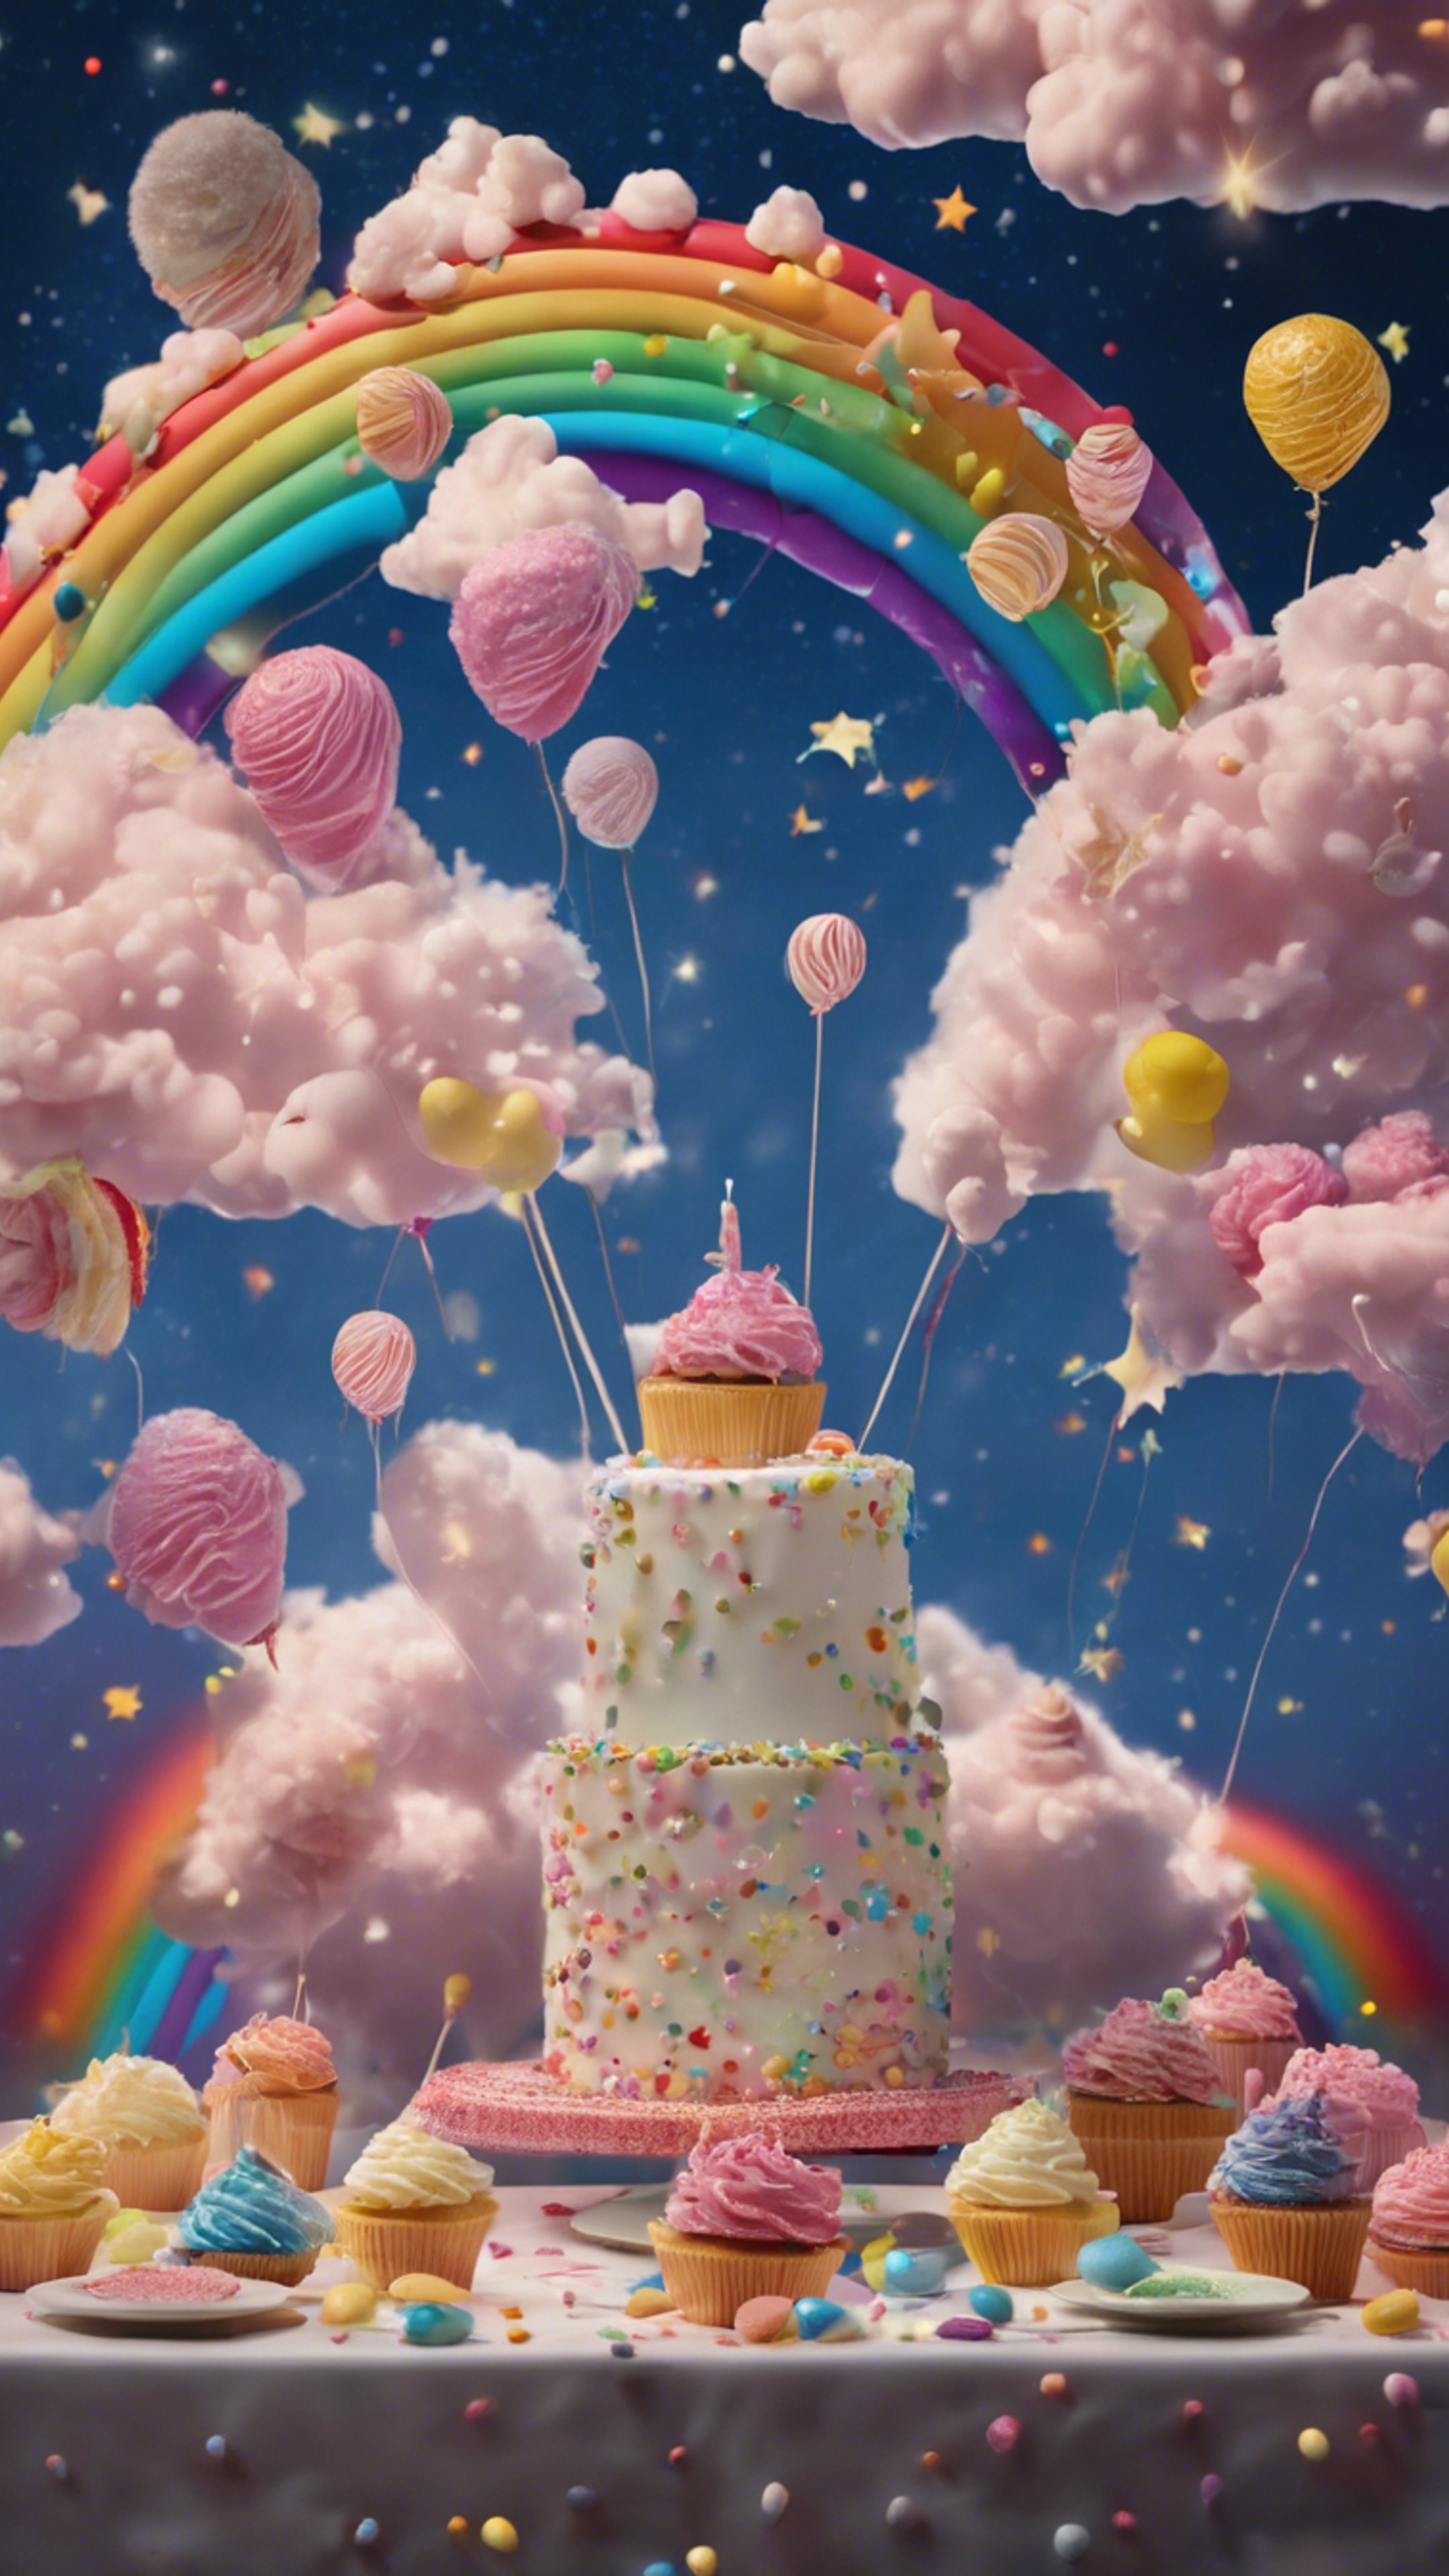 Surreal representation of a birthday party with floating cakes, candies amid fluffy clouds and rainbows discordantly juxtaposed against a starry night sky. Валлпапер[7f18c2fd7760424e83fc]